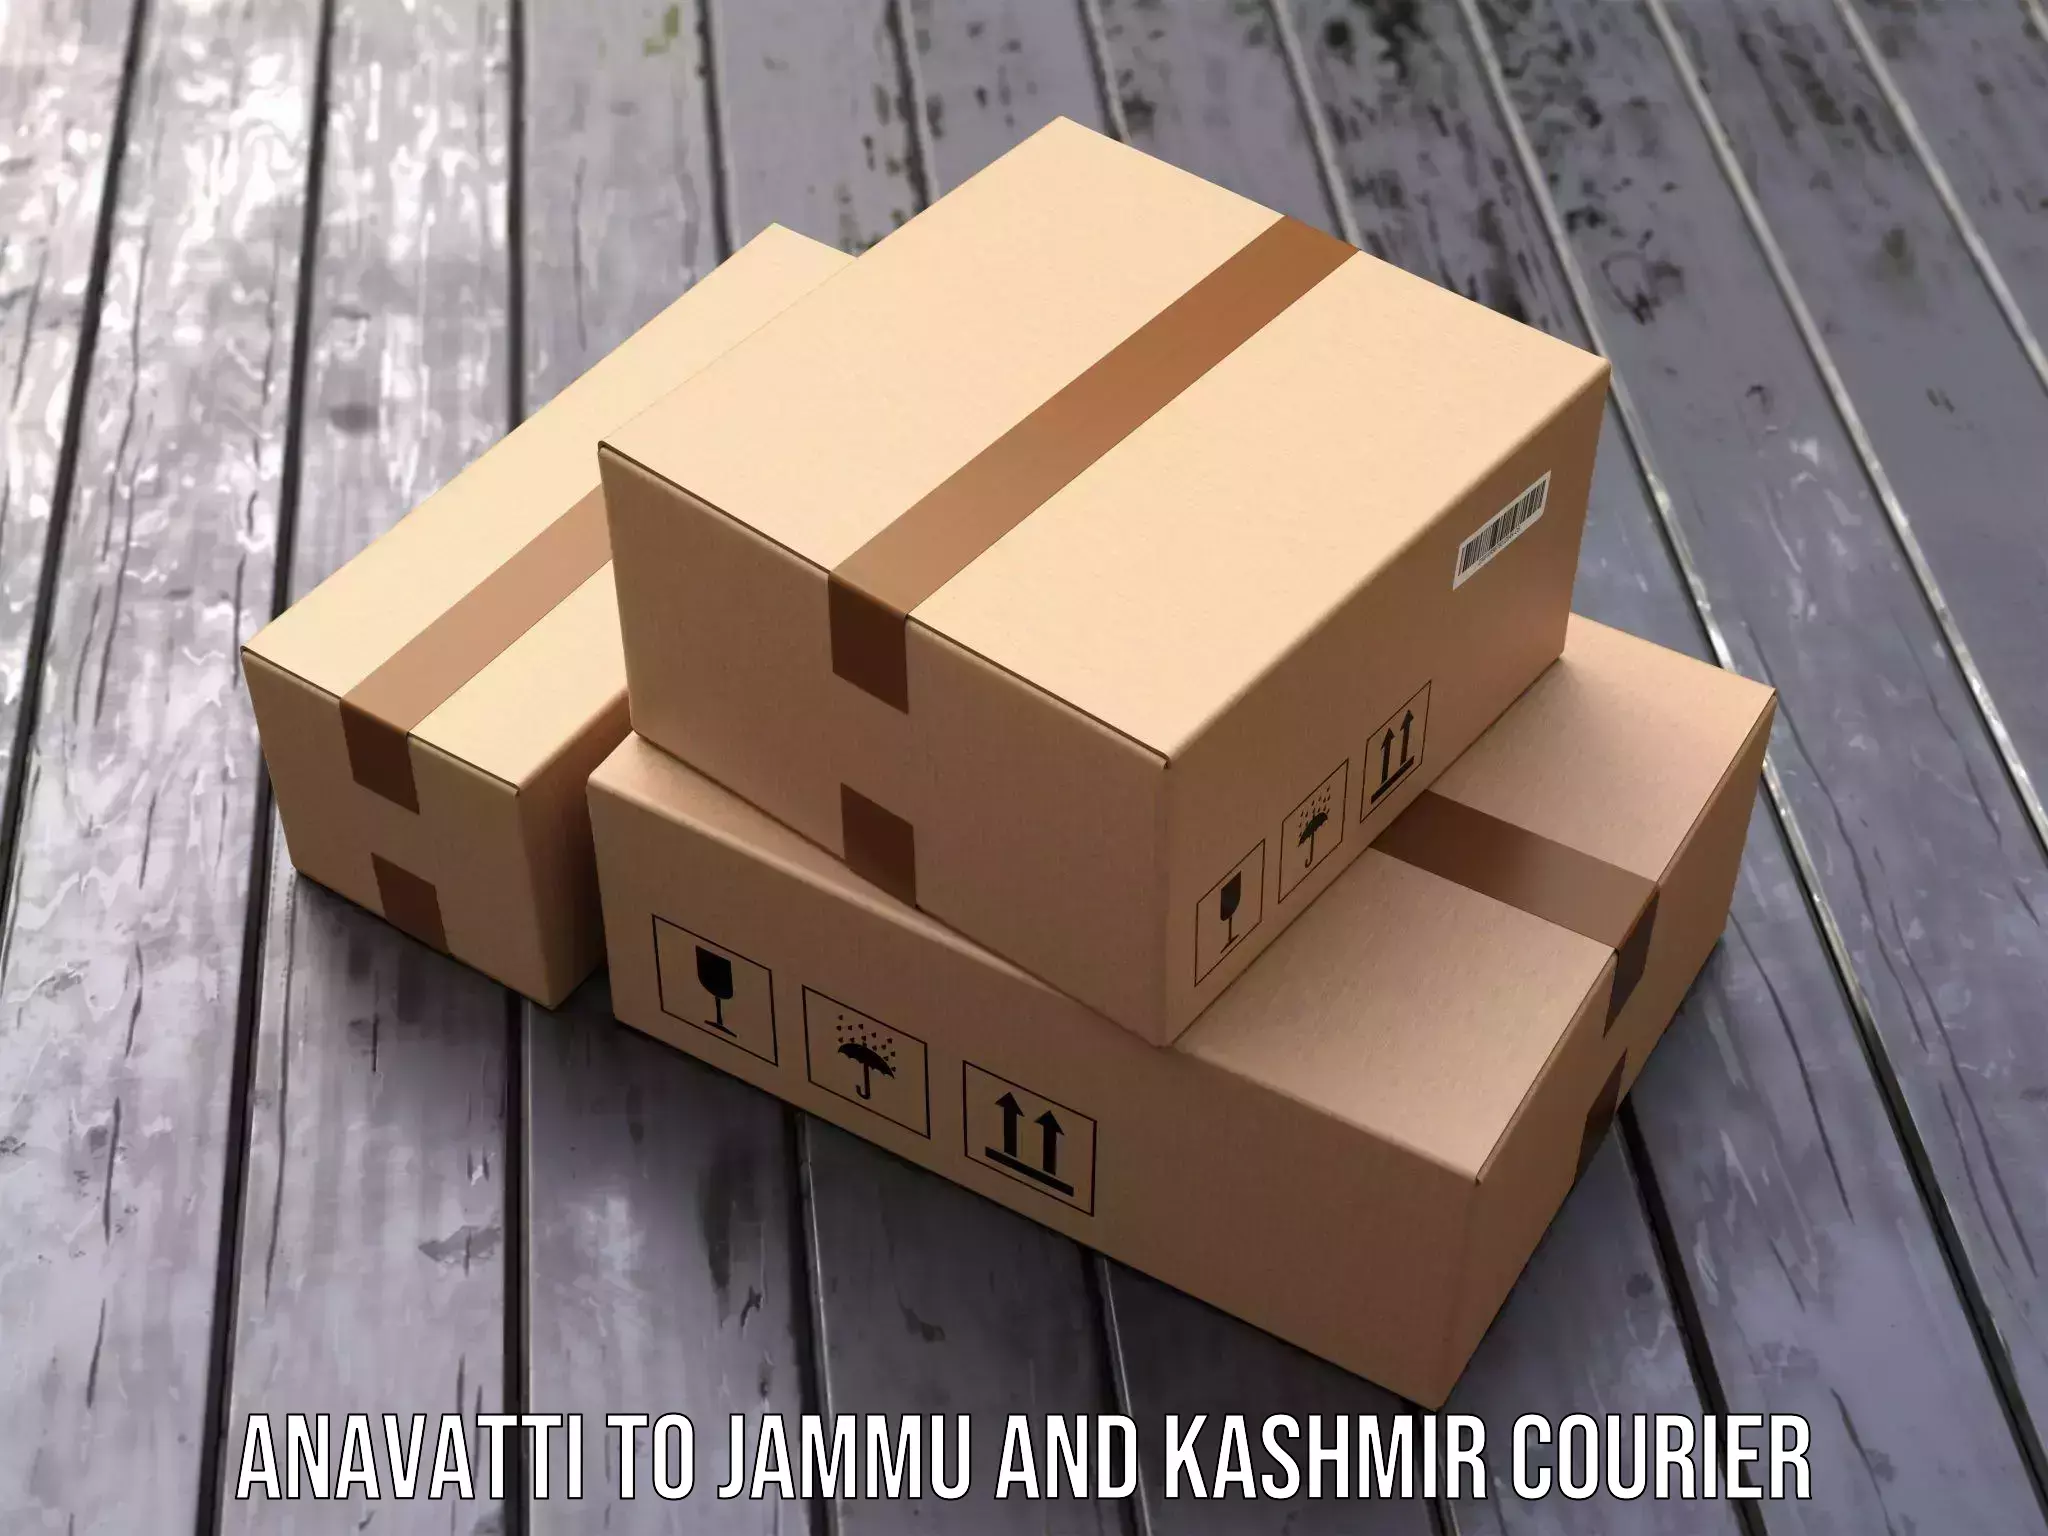 Global shipping networks in Anavatti to Baramulla